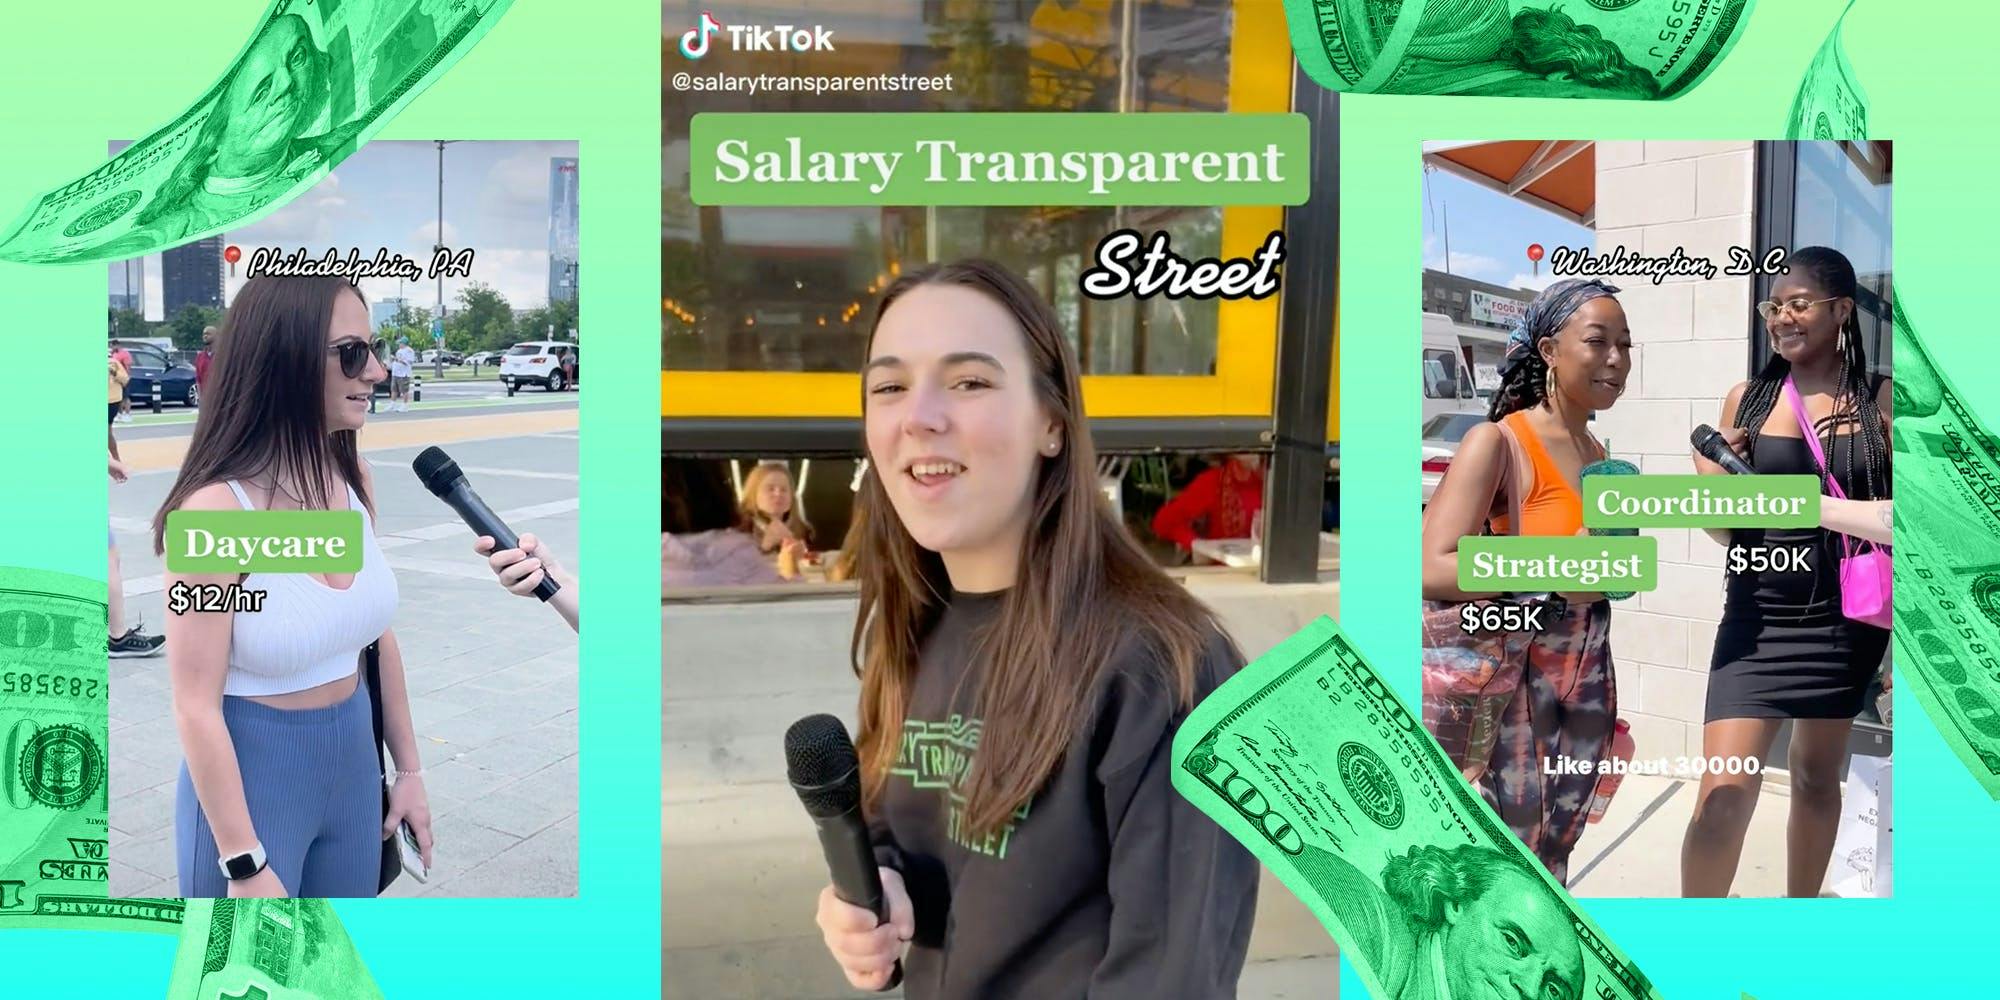 Salary Transparent Street is demystifying wages on TikTok